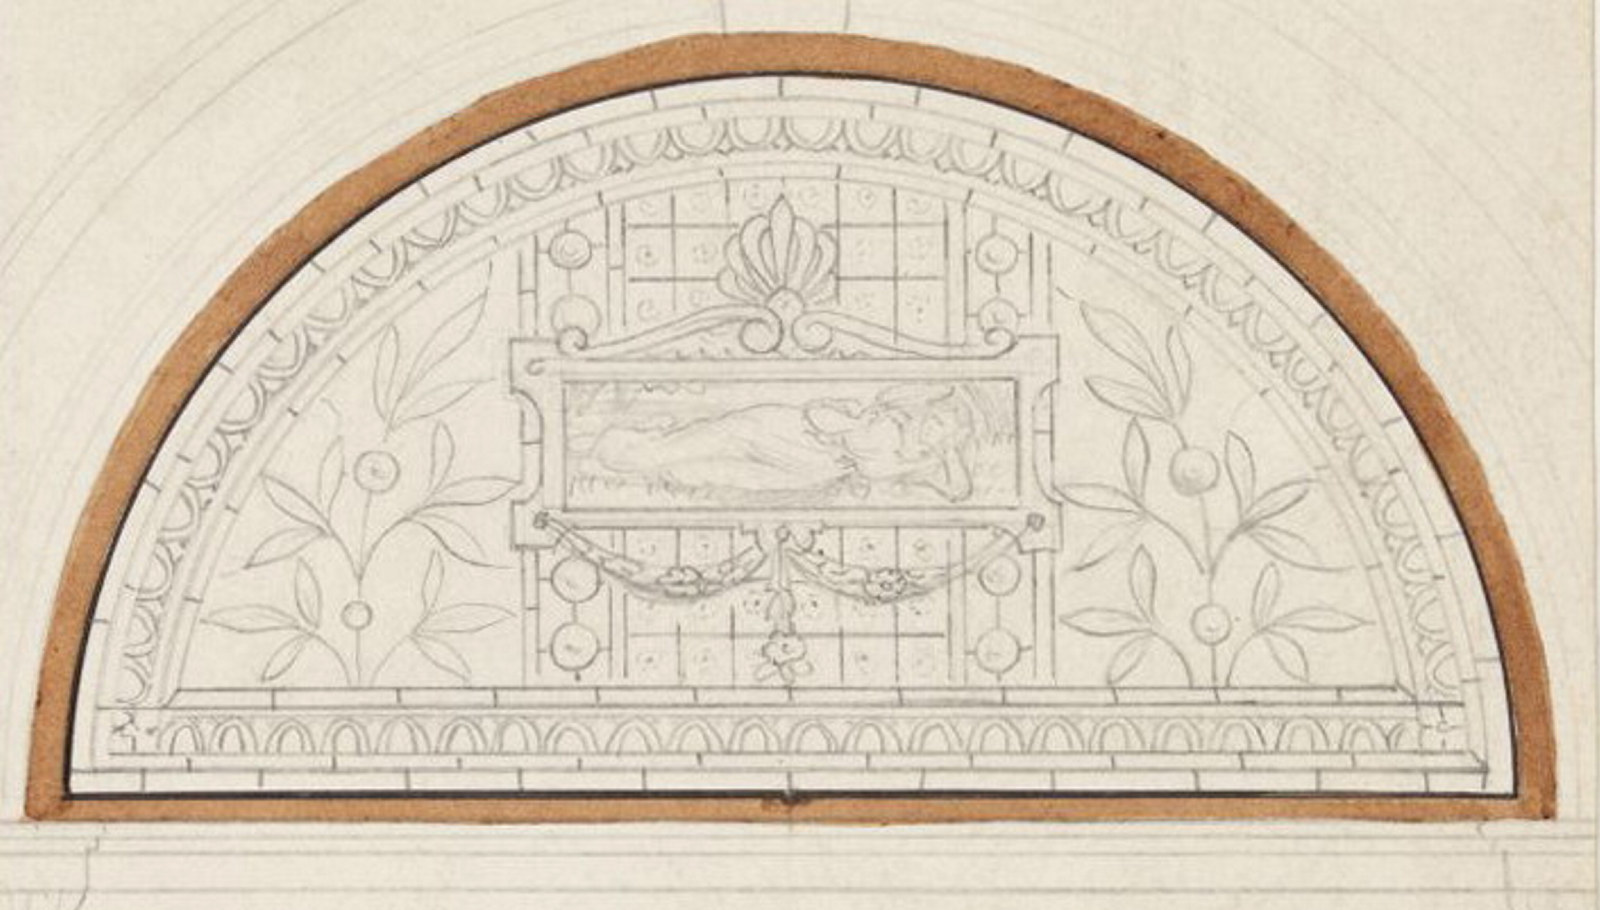 The â€˜reclining womanâ€™ motif appears in this â€˜design for windowâ€™, 1870sâ€“80s